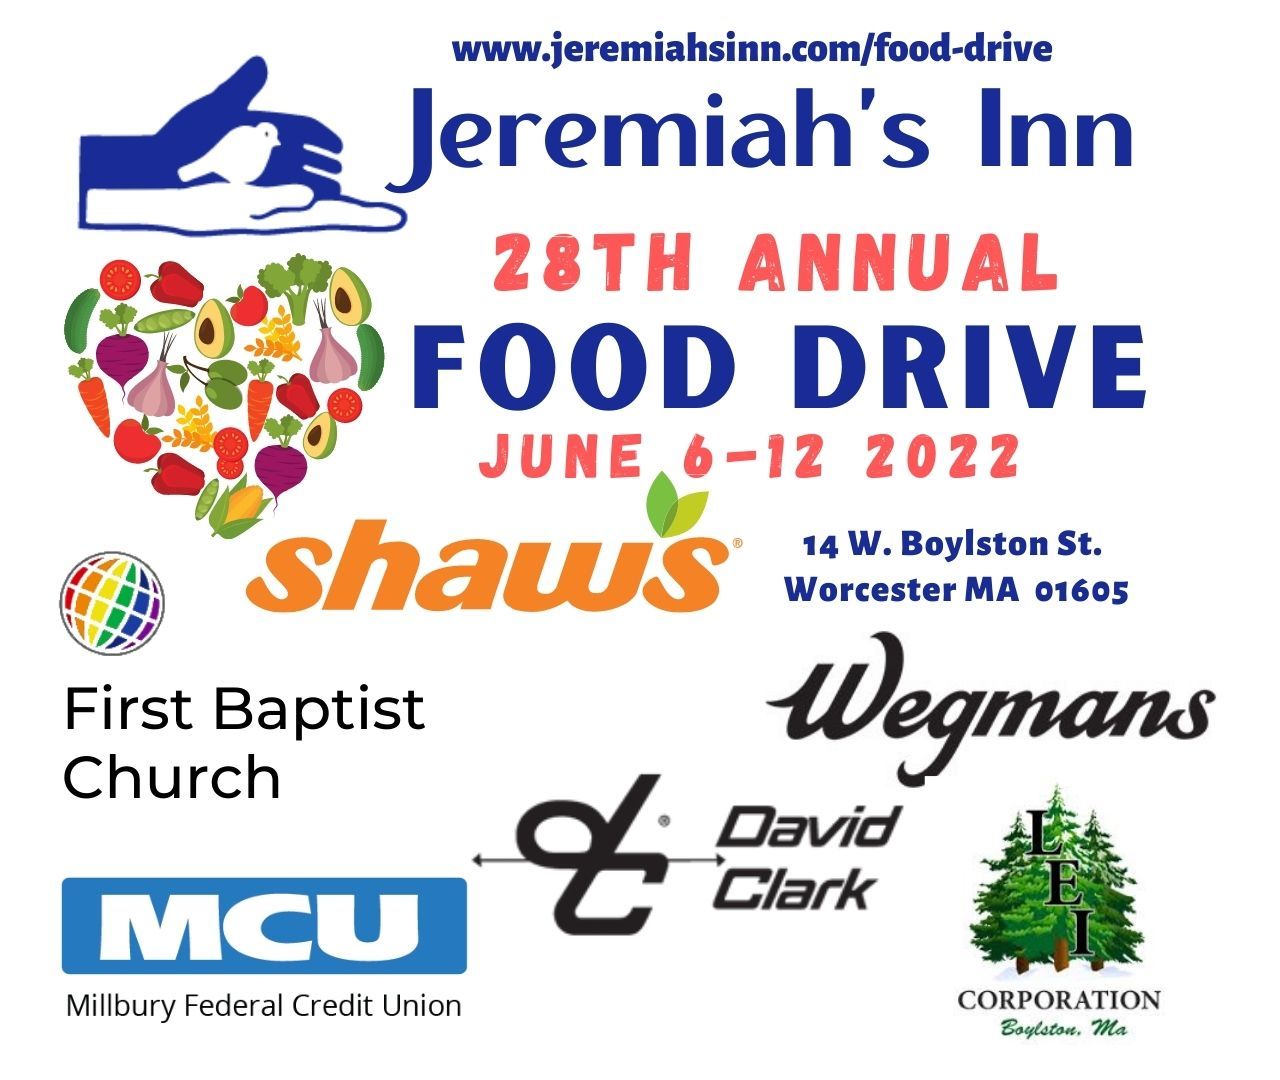 Jeremiah's Inn 28th Annual Food Drive, Worcester, Massachusetts, United States